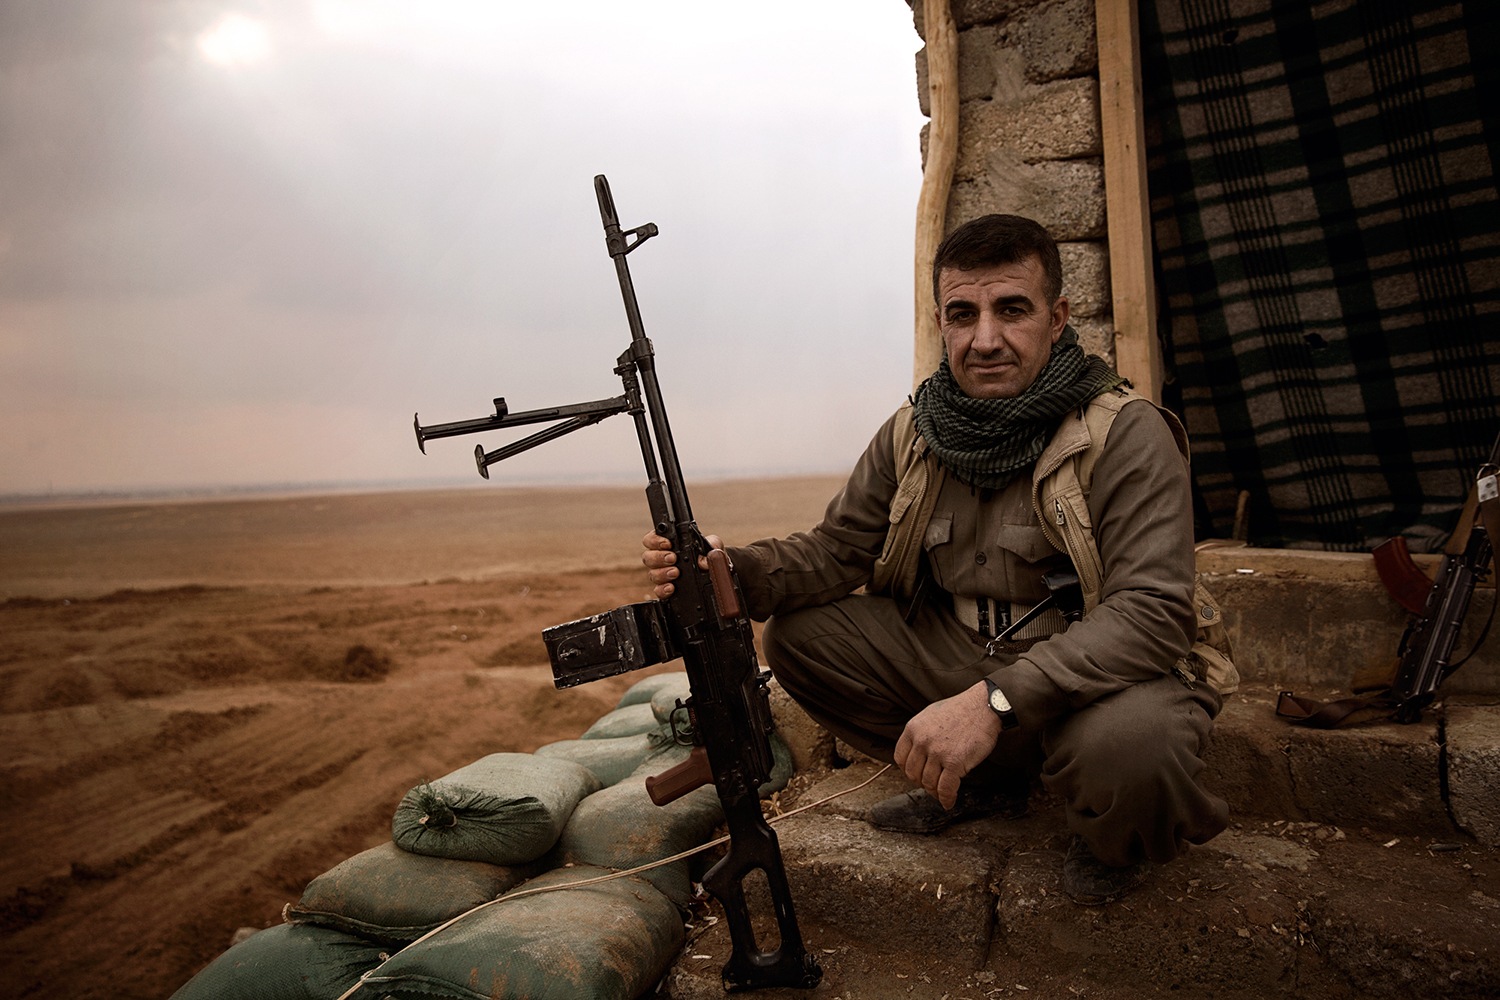 A kurdish Peshmerga fighter with his weapon in front of the Iraqi border